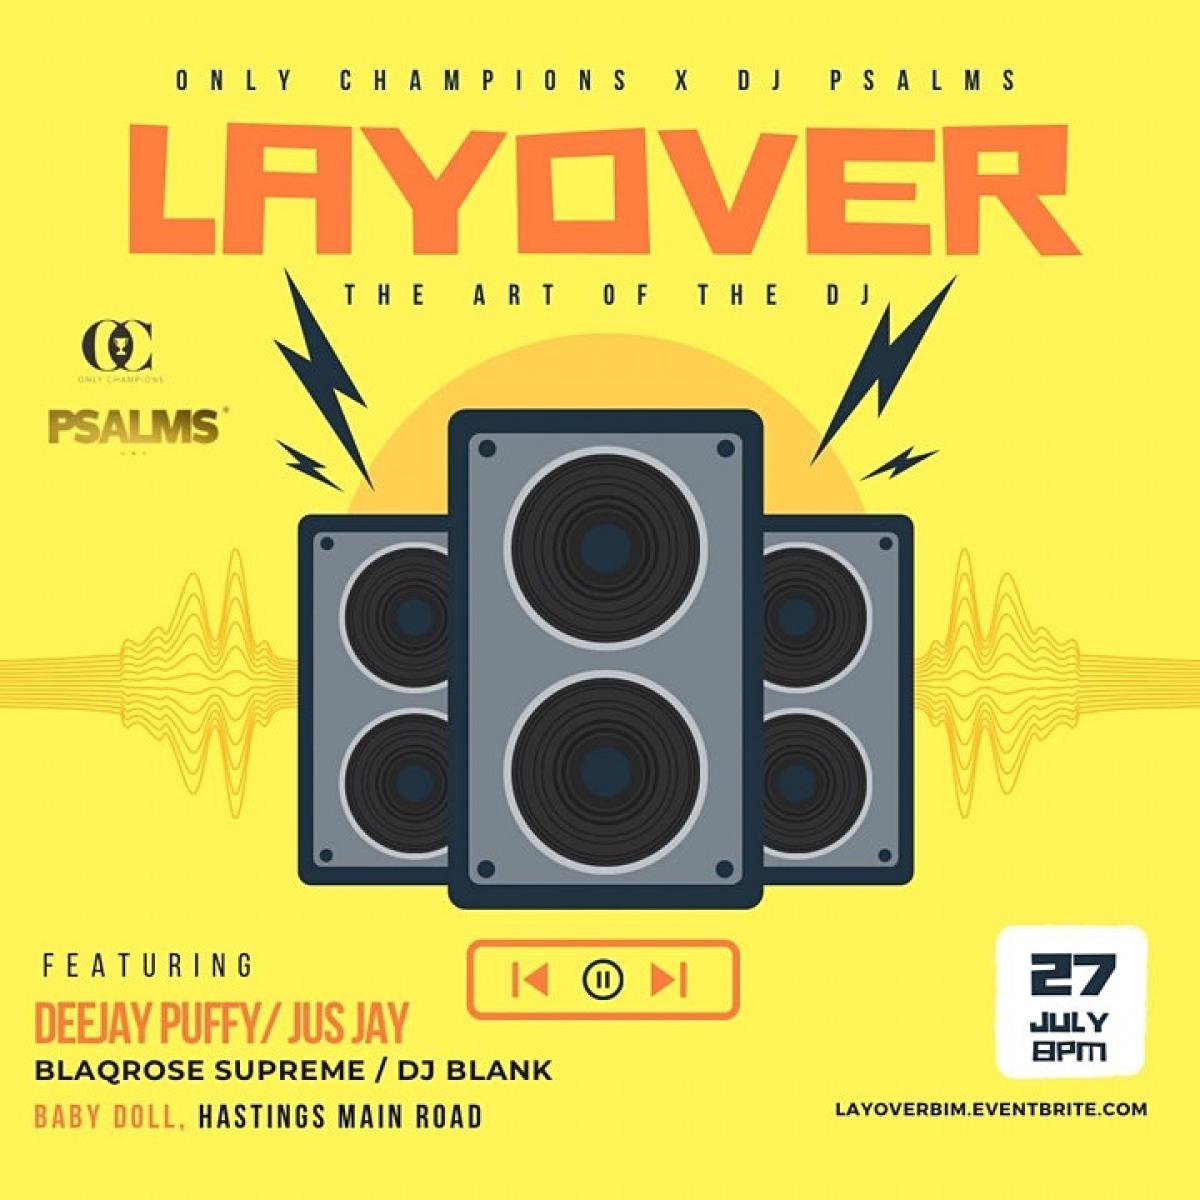 Layover: The Art of the DJ flyer or graphic.